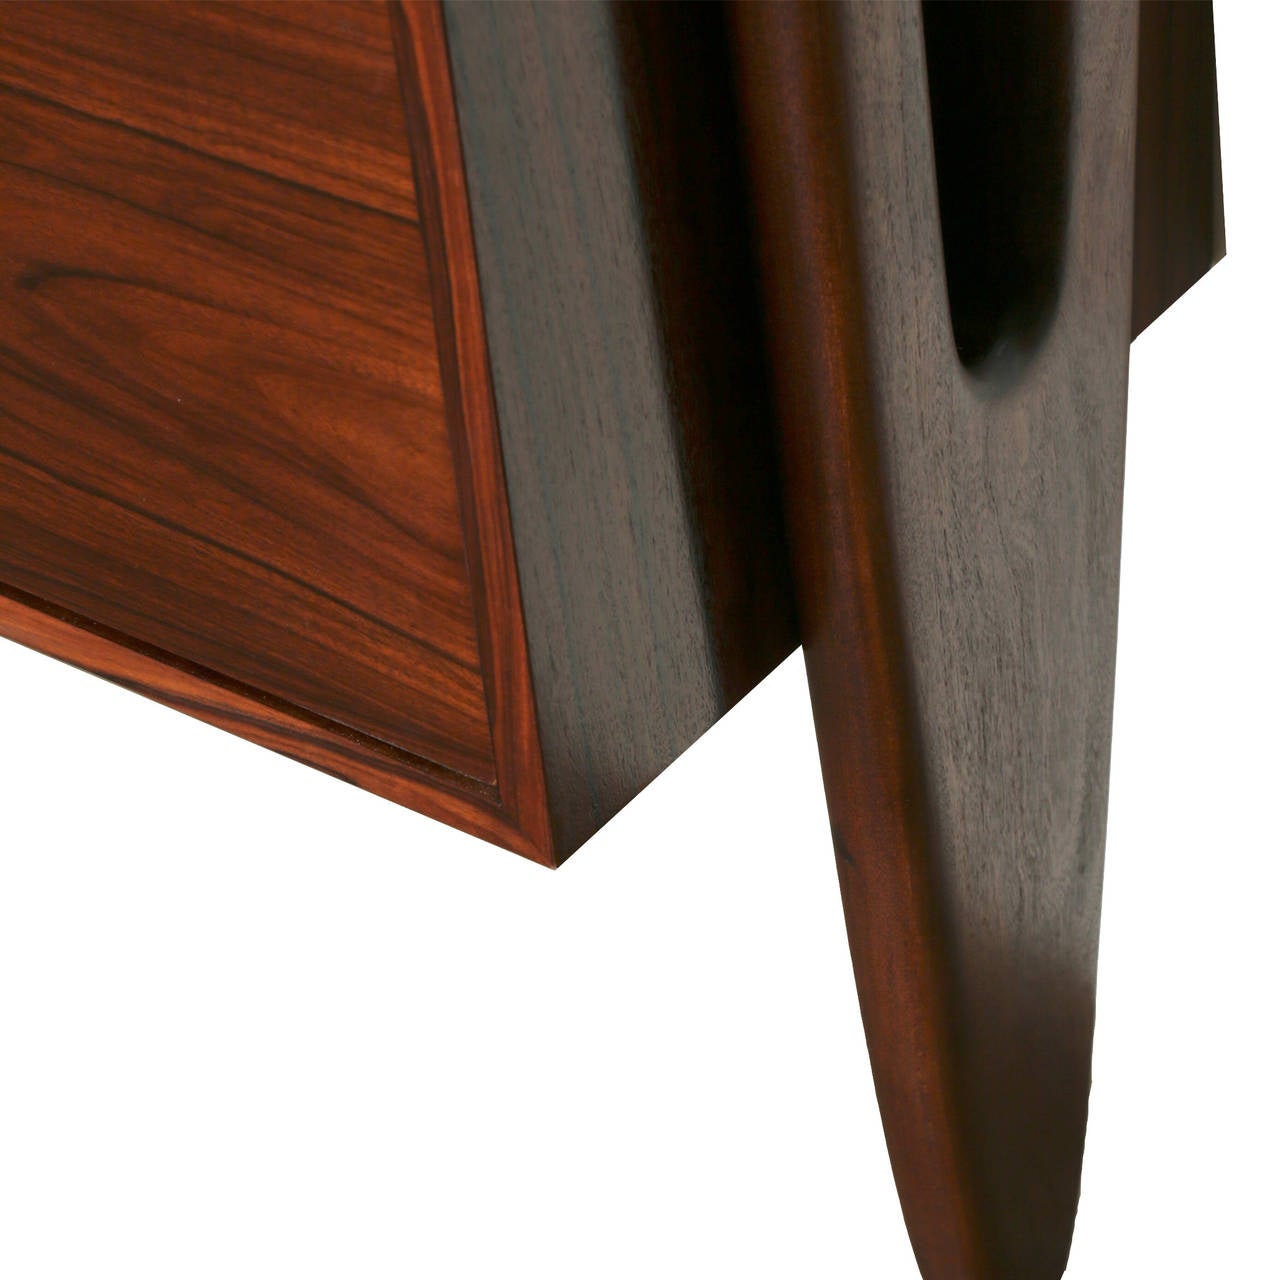 Brass Brazilian Mid-Century Modern Exotic Hardwood Wall Unit with Glass Shelves For Sale